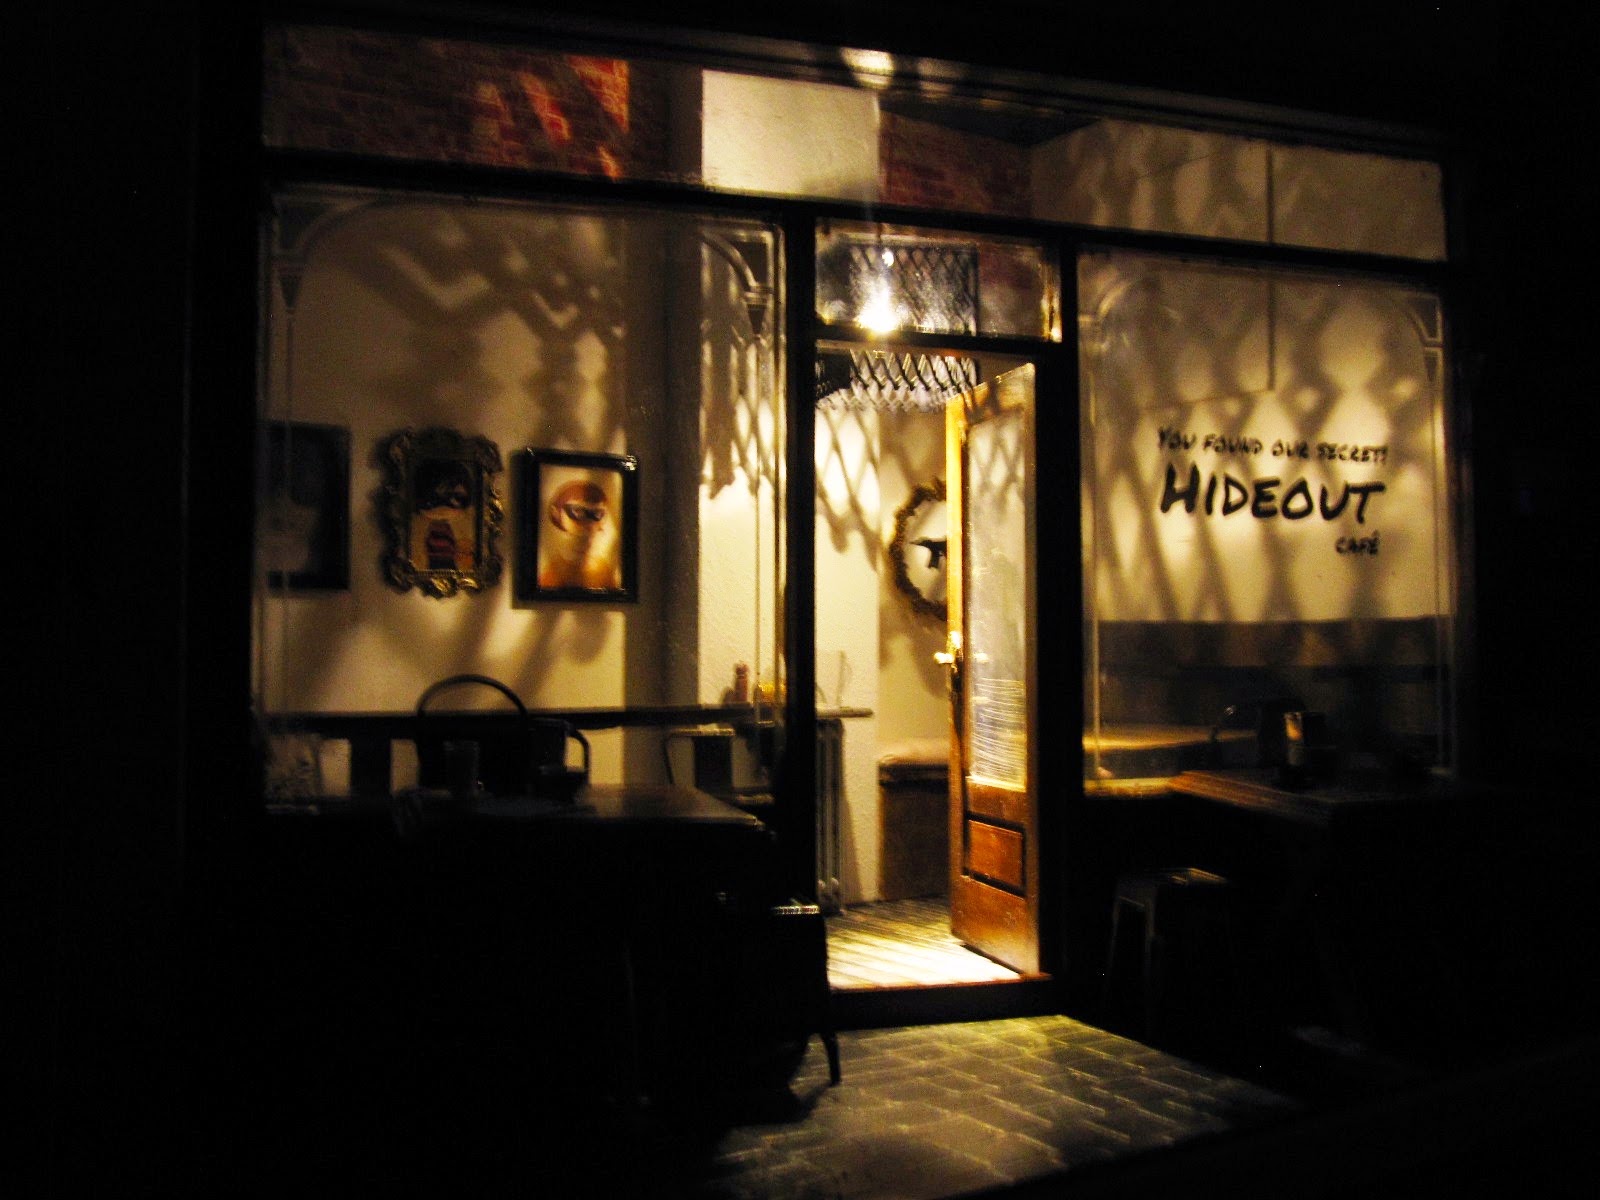 Exterior of a modern dolls' house miniature cafe at night, with the interior light up.